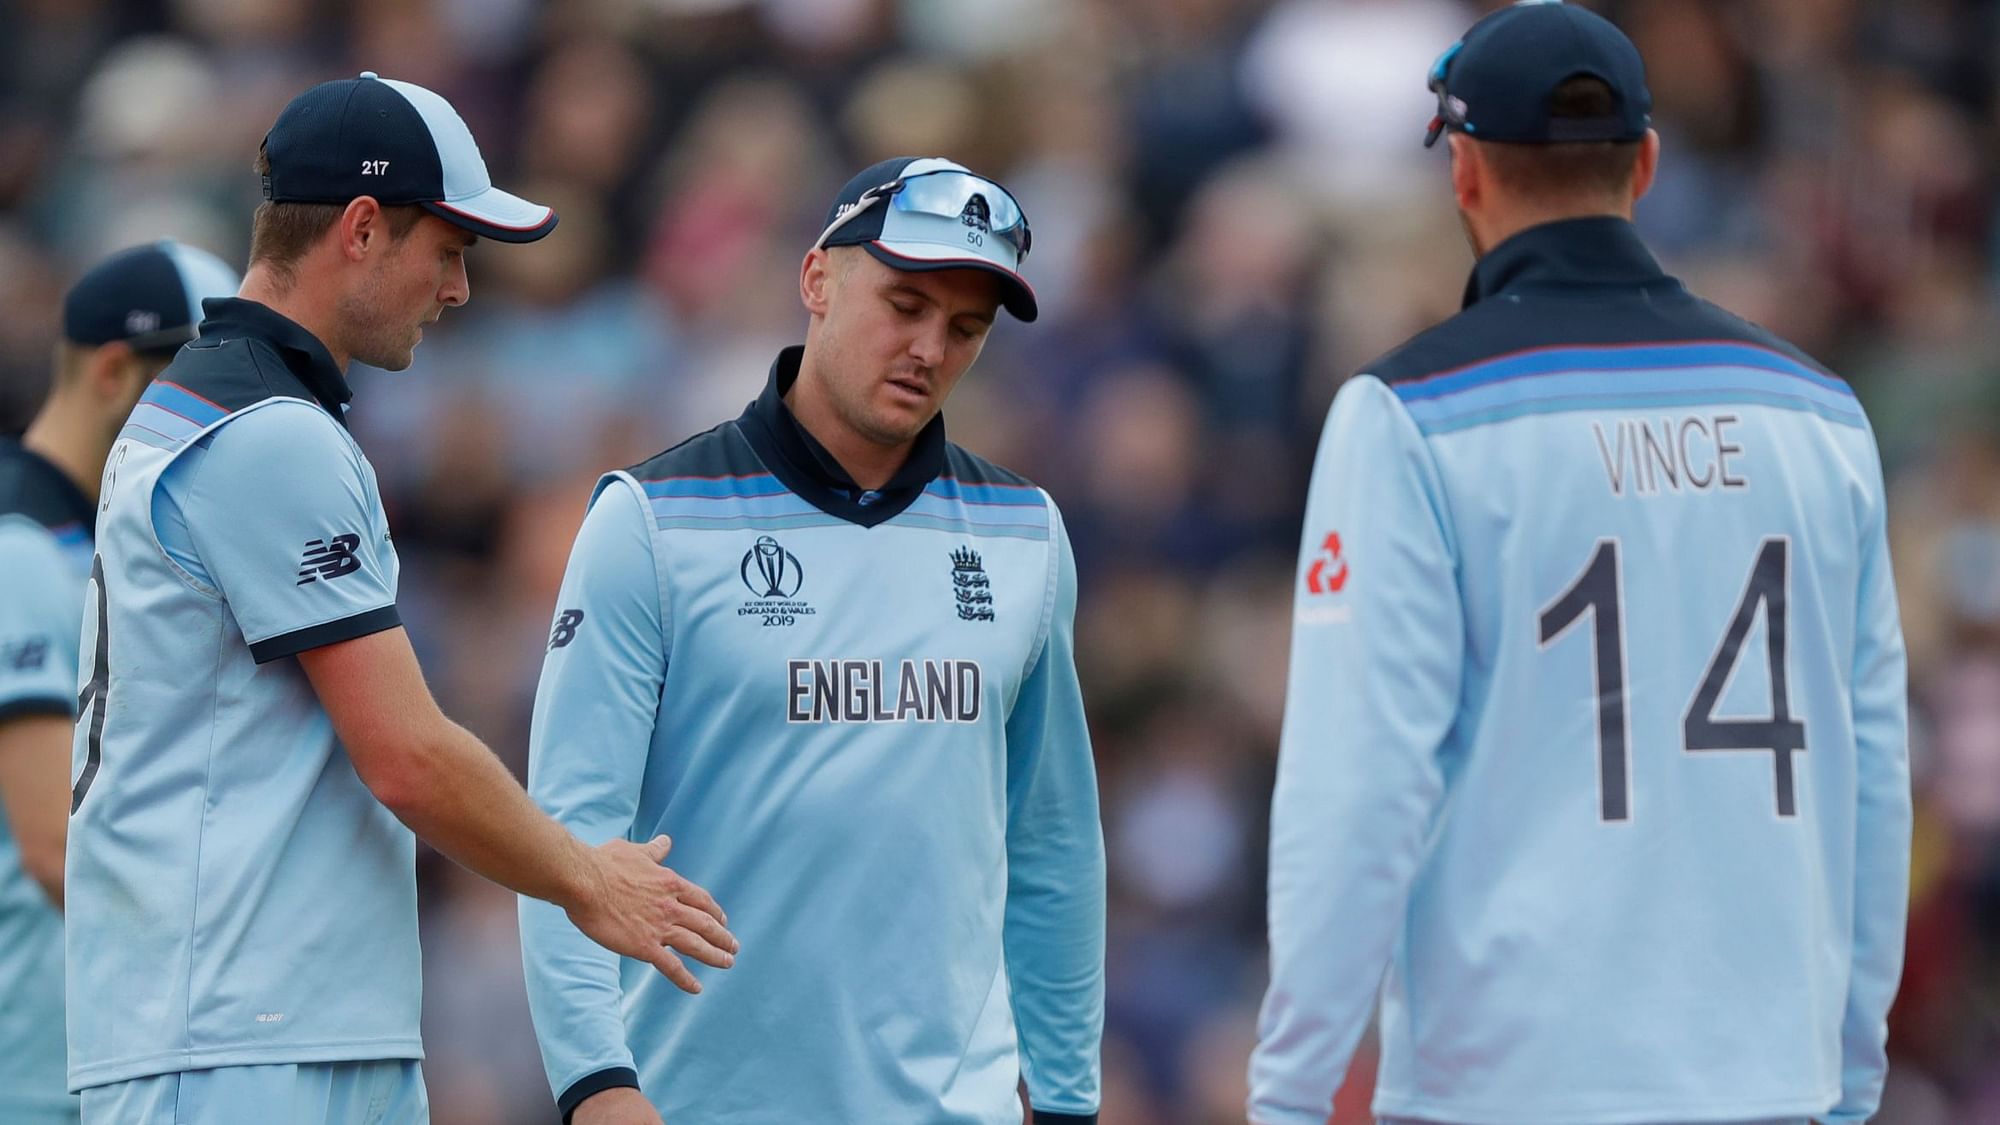 England cricketer Jason Roy has been ruled out of their next two World Cup matches due to a hamstring injury.